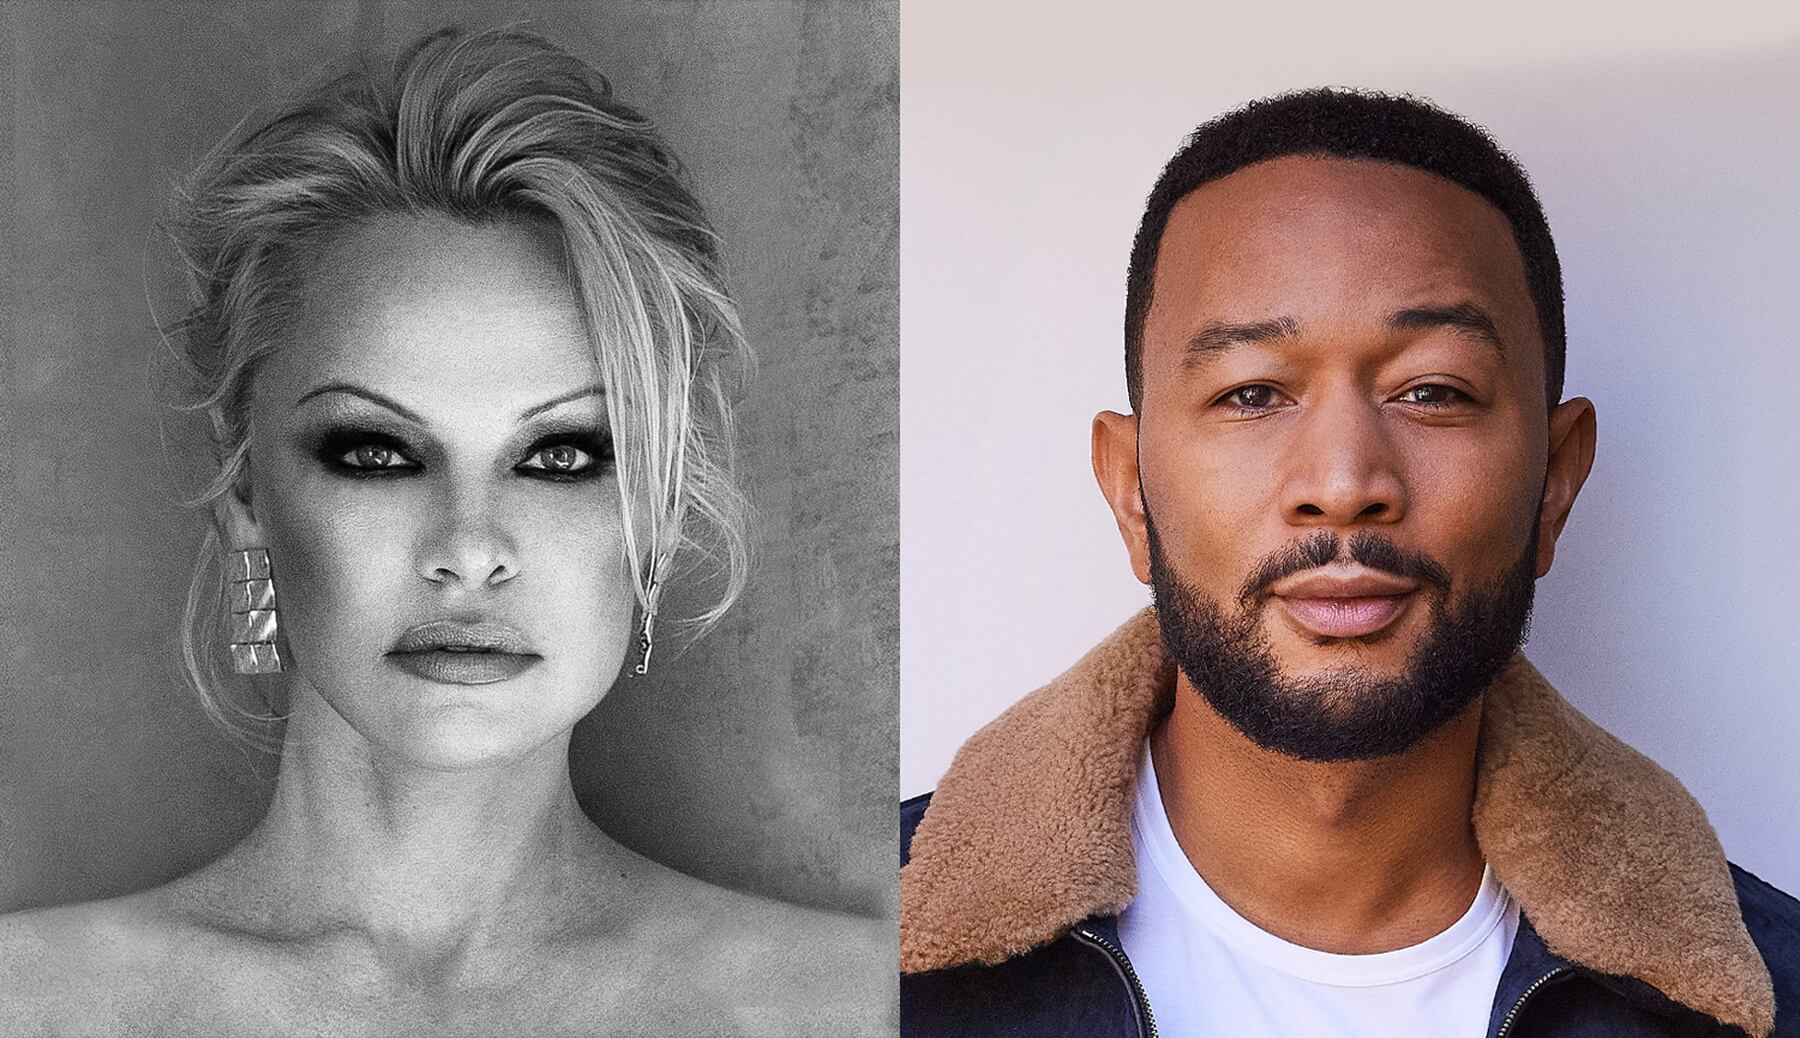 Pamela Anderson and John Legend To Headline The Business of Beauty Global Forum